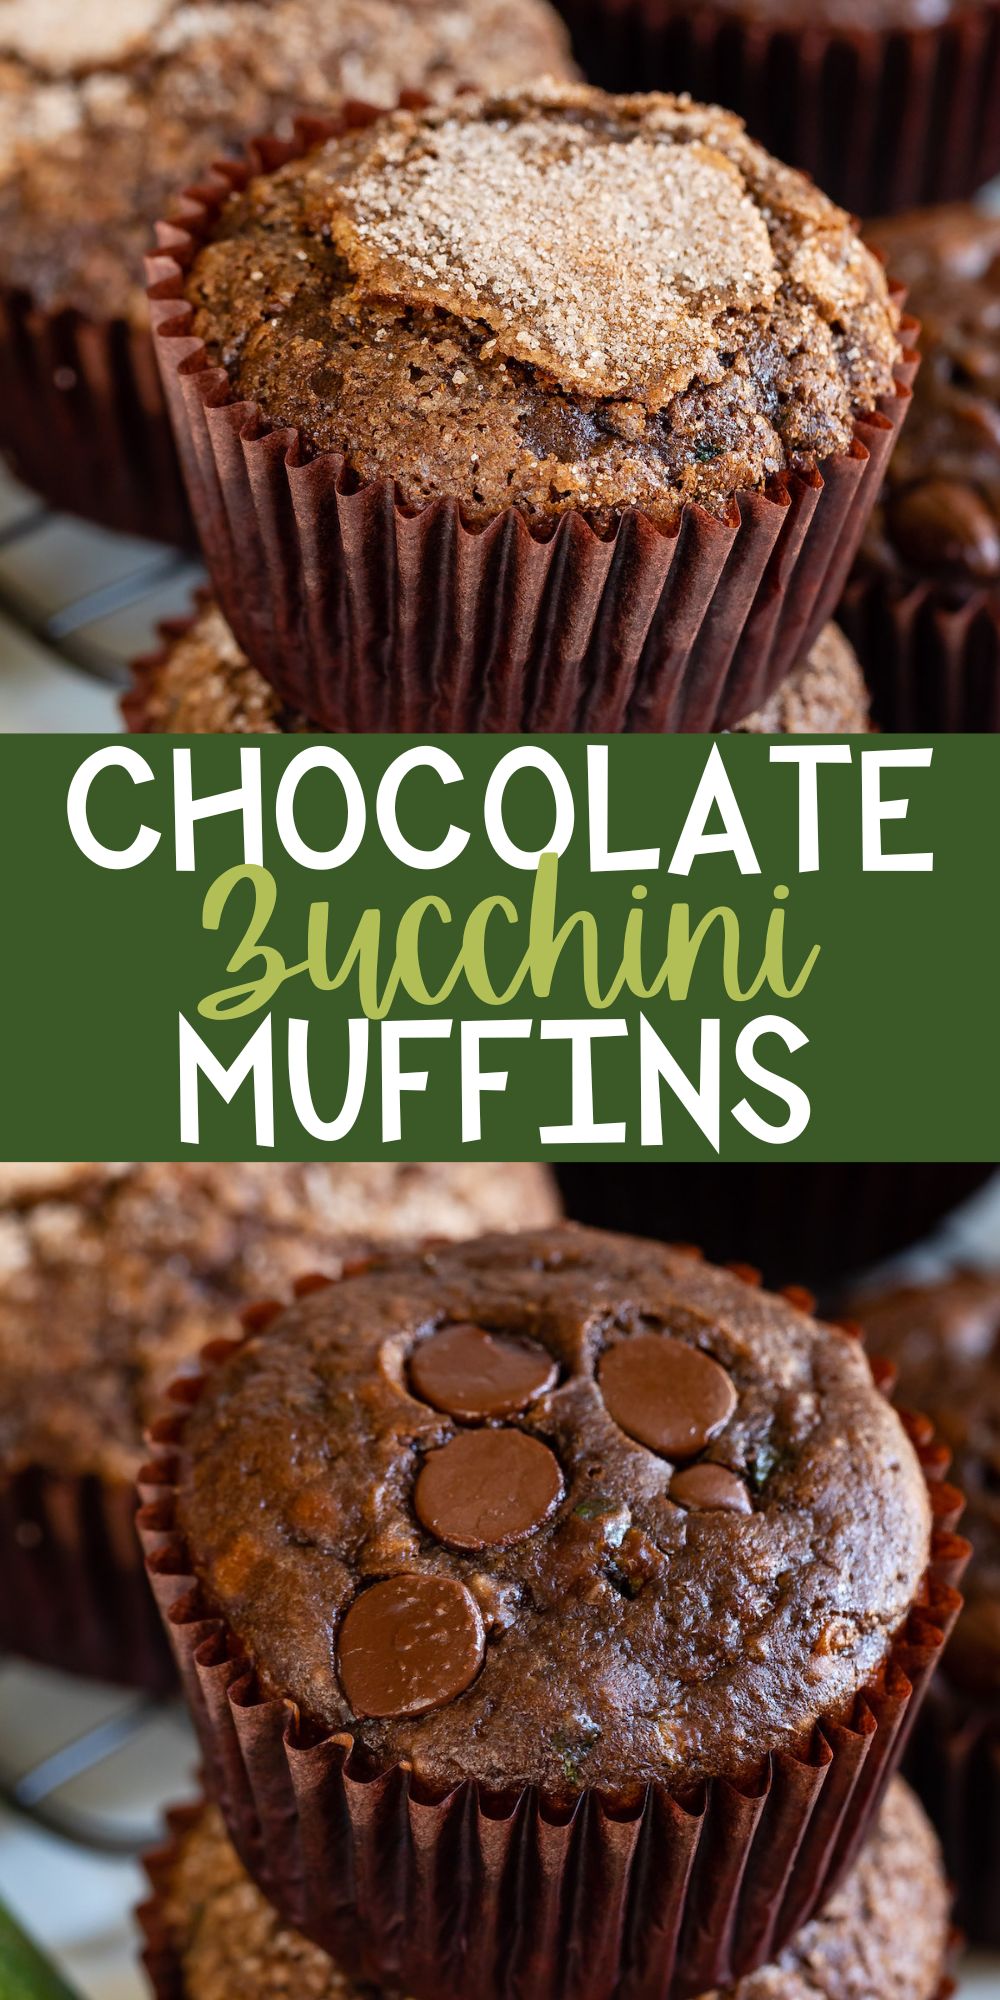 two photos of stacked chocolate muffins in brown cupcake wrappers with words on the image.